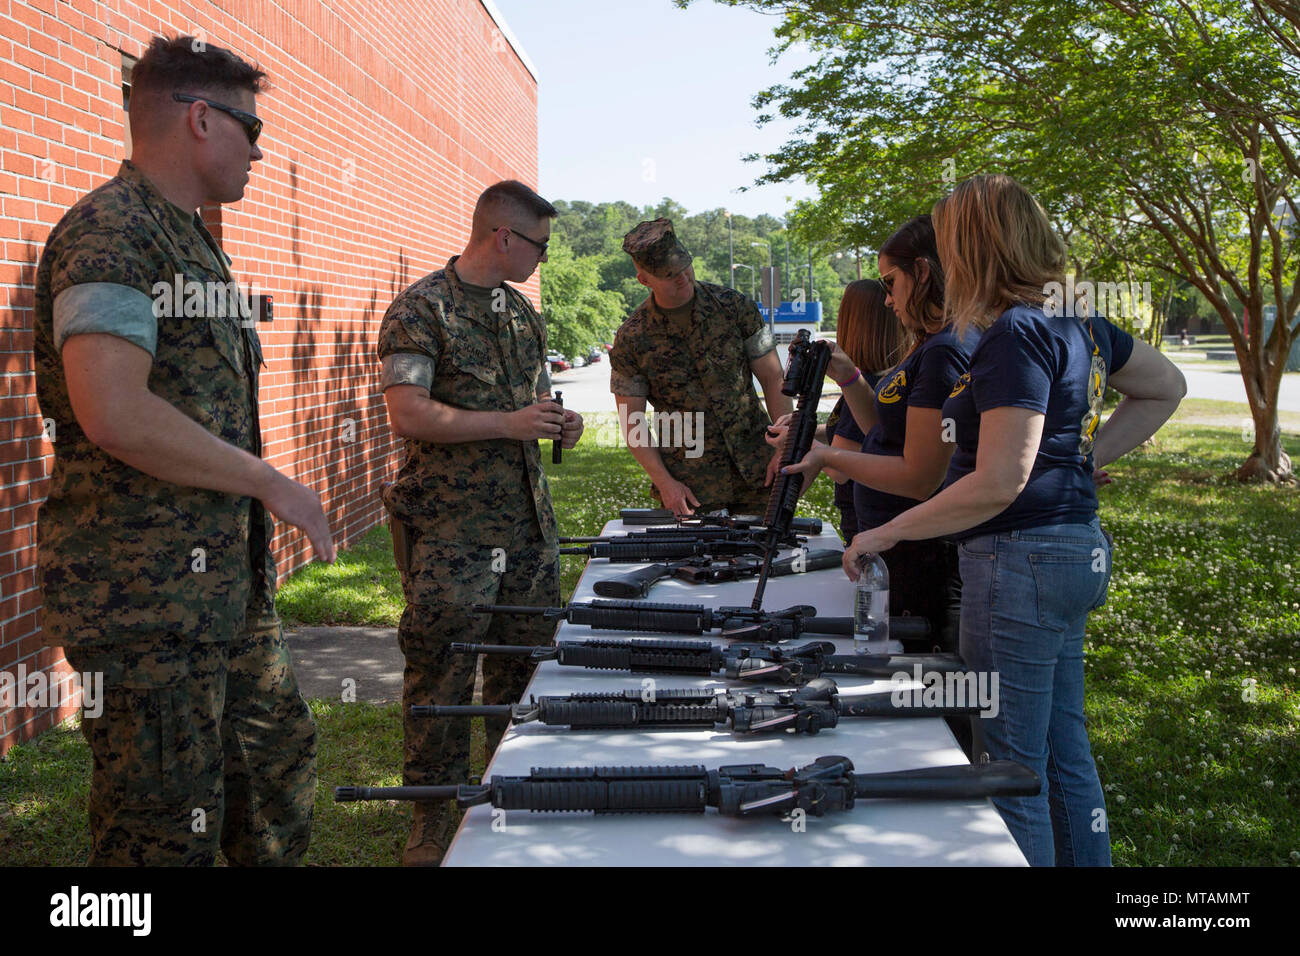 U.S. Marine Corps Corporal Philip J. Breuer, left, and Lance Cpl. Daniel J. Scansen teach the nomenclature of an M16A4 Service Rifle to spouses and family members of Marines and Sailors with II Marine Expeditionary Force (II MEF) during “In Their Boots” day on Camp Lejeune, N.C., April 21, 2017. “In Their Boots” day is an event in which spouses and family members of Marines and Sailors with II MEF are able to participate in various Marine Corps related events and exercises. Stock Photo